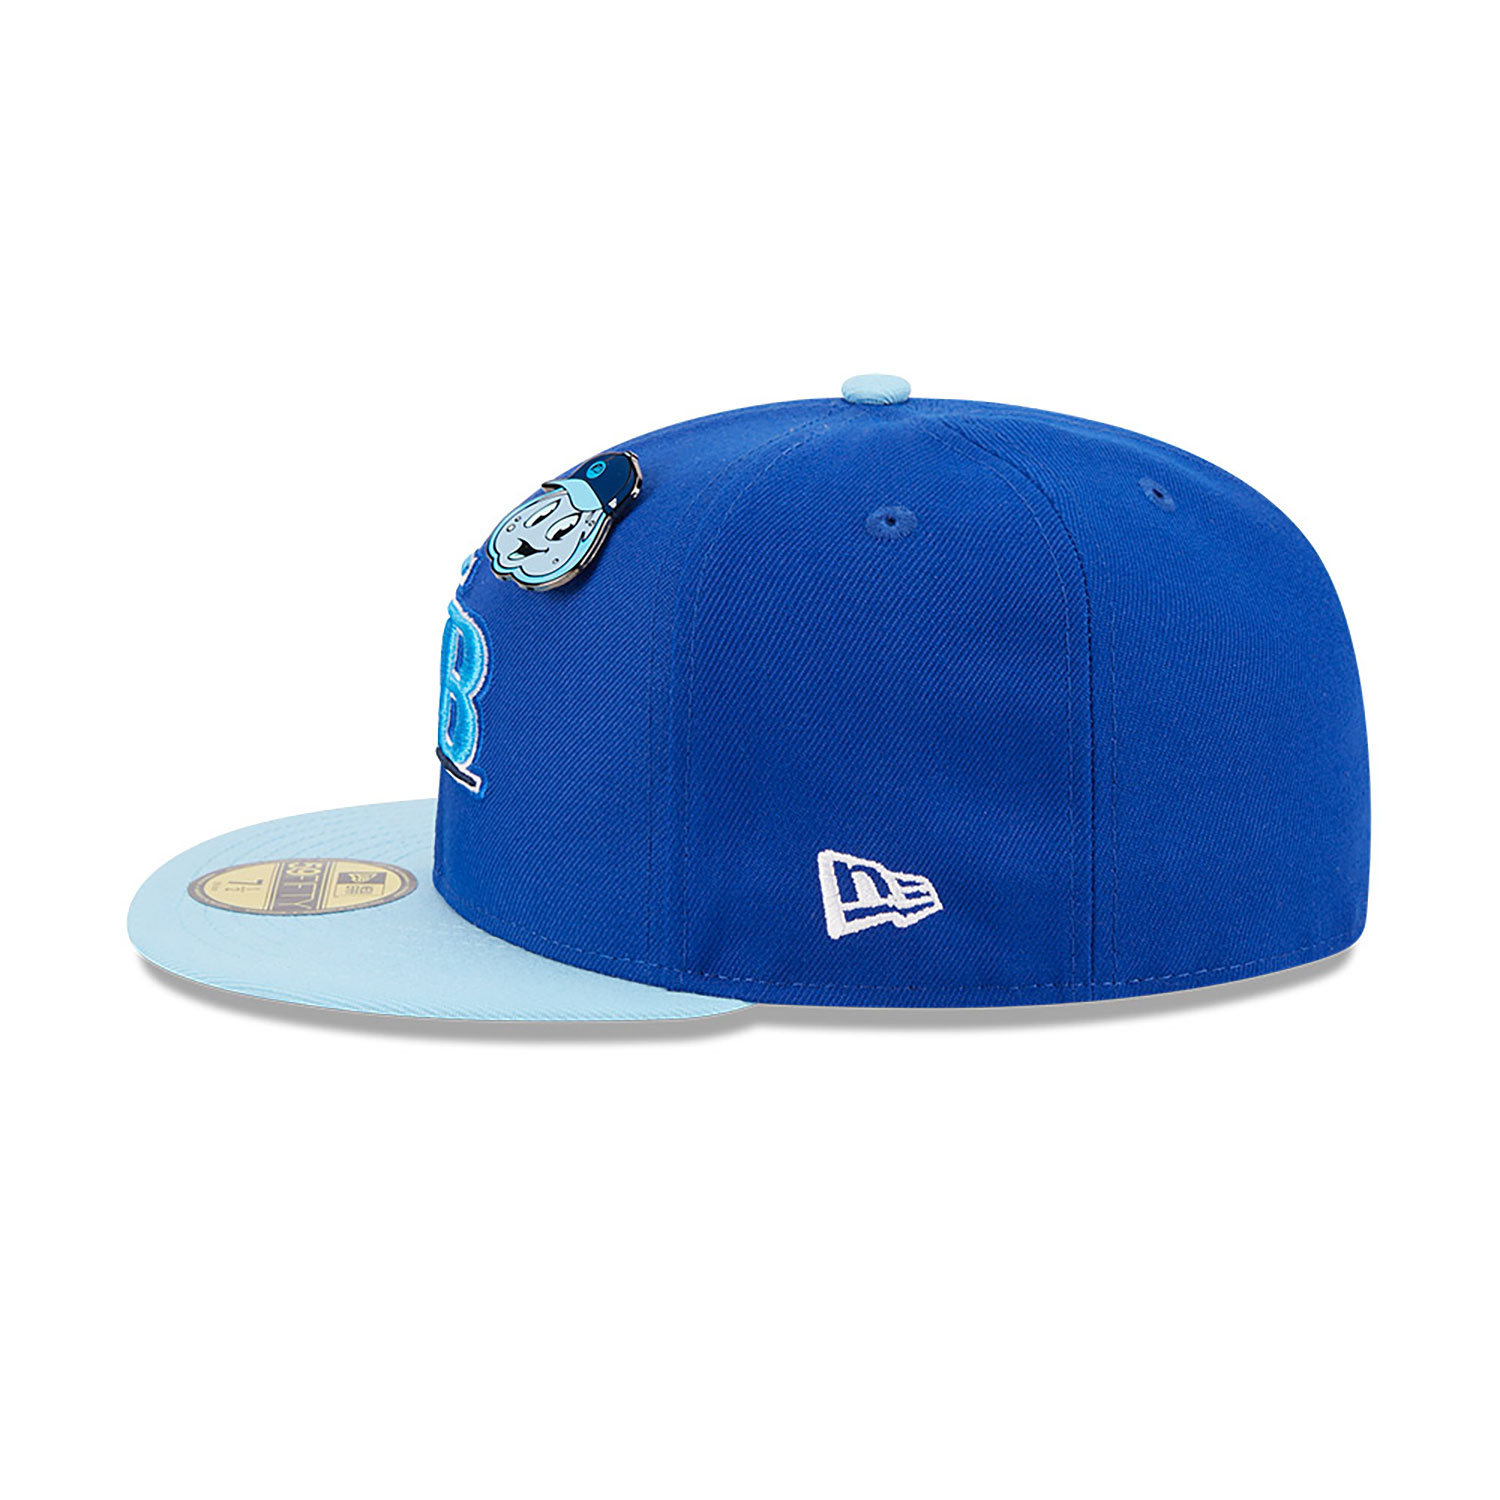 Tampa Bay Rays The Elements Blue 59FIFTY Fitted Cap